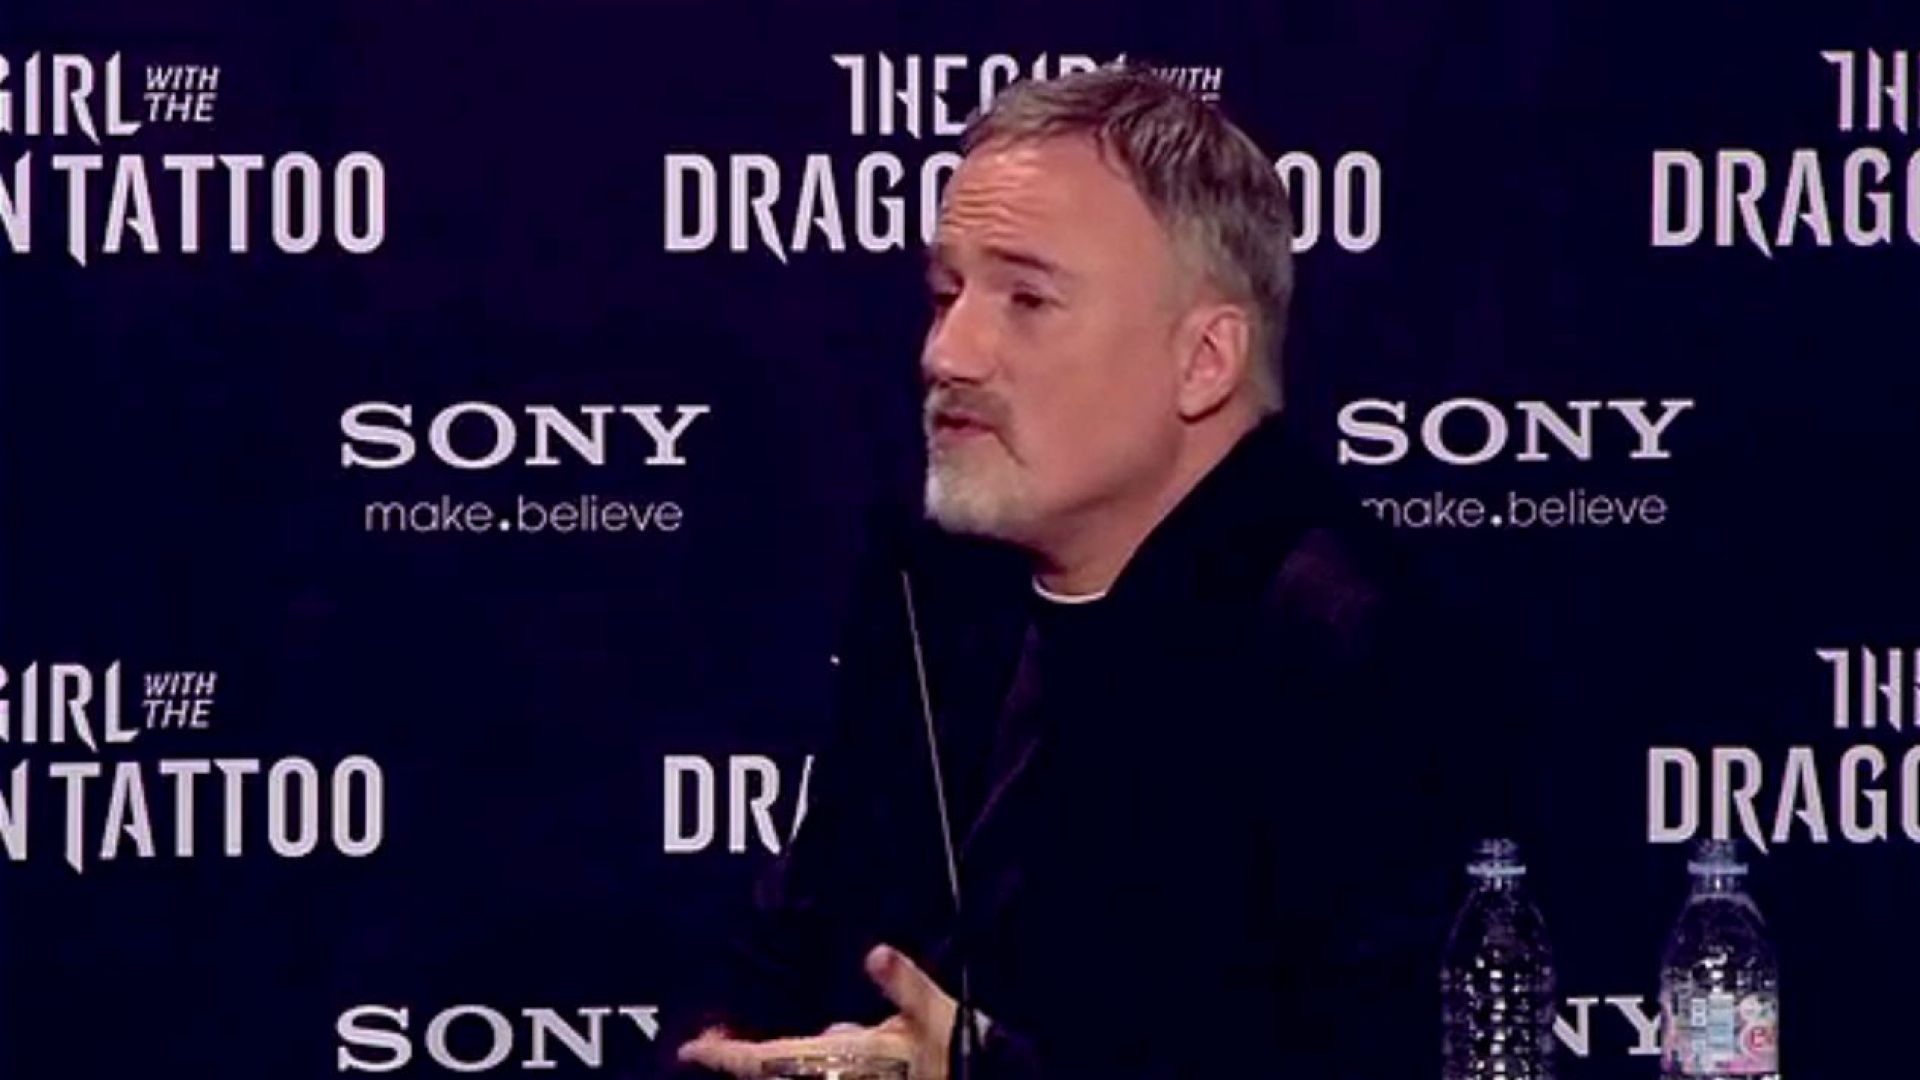 David Fincher, Rooney Mara and Stellan Skarsgard talk about making The Girl with the Dragon Tattoo